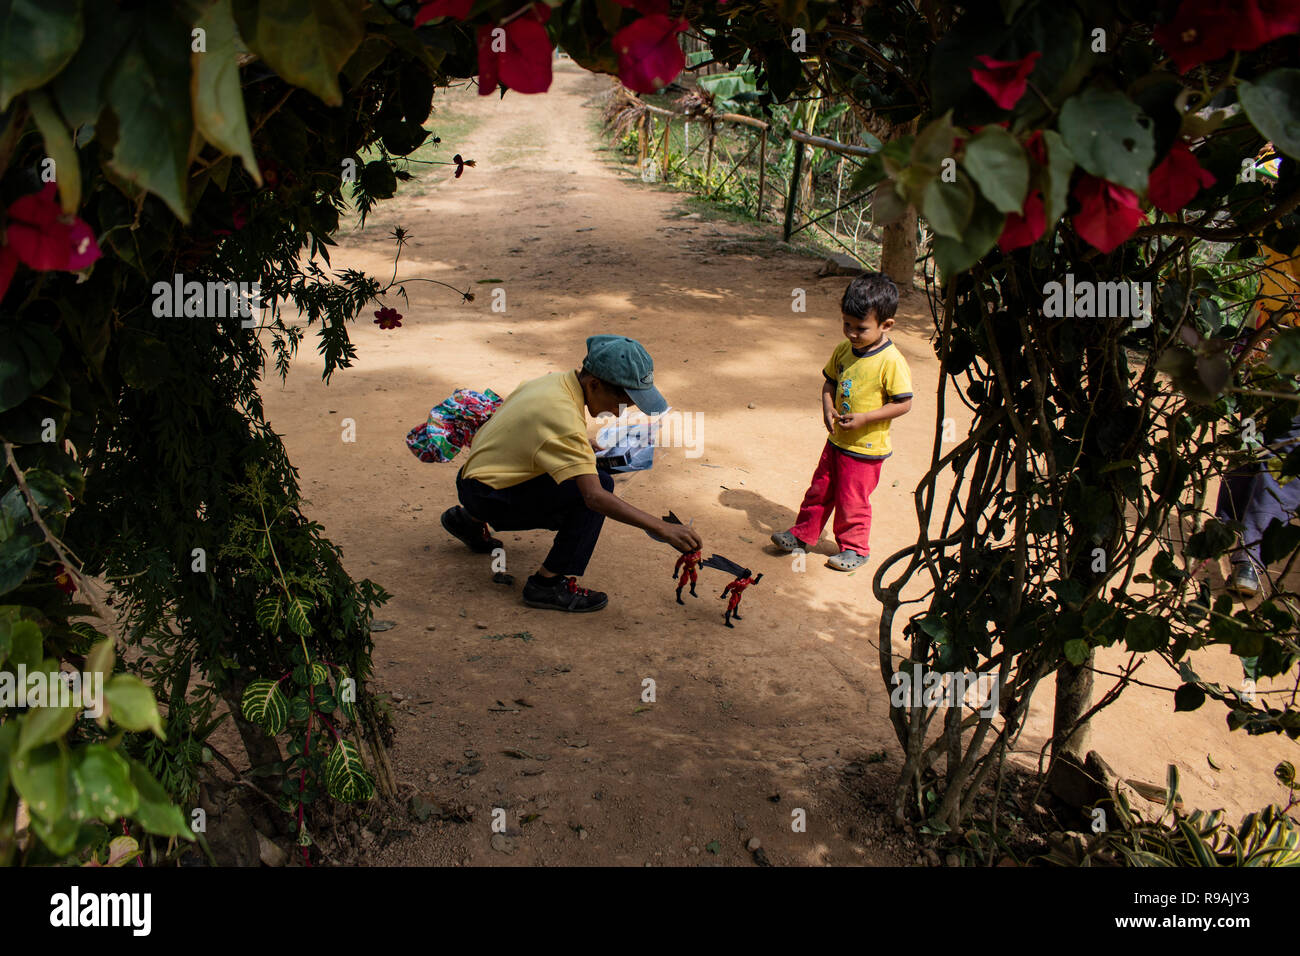 Caracas, Venezuela. 21st Dec, 2018. Children of a rural community east of Caracas play with gifts they receive through the initiative 'Un Juguete: Una Buena Noticia' (A toy, a happy message) for Christmas. The initiative was founded by reporters and journalists in Venezuela. The group also provides school supplies for children from a poorer neighbourhood in Caracas. Credit: Rayner Pena/dpa/Alamy Live News Stock Photo